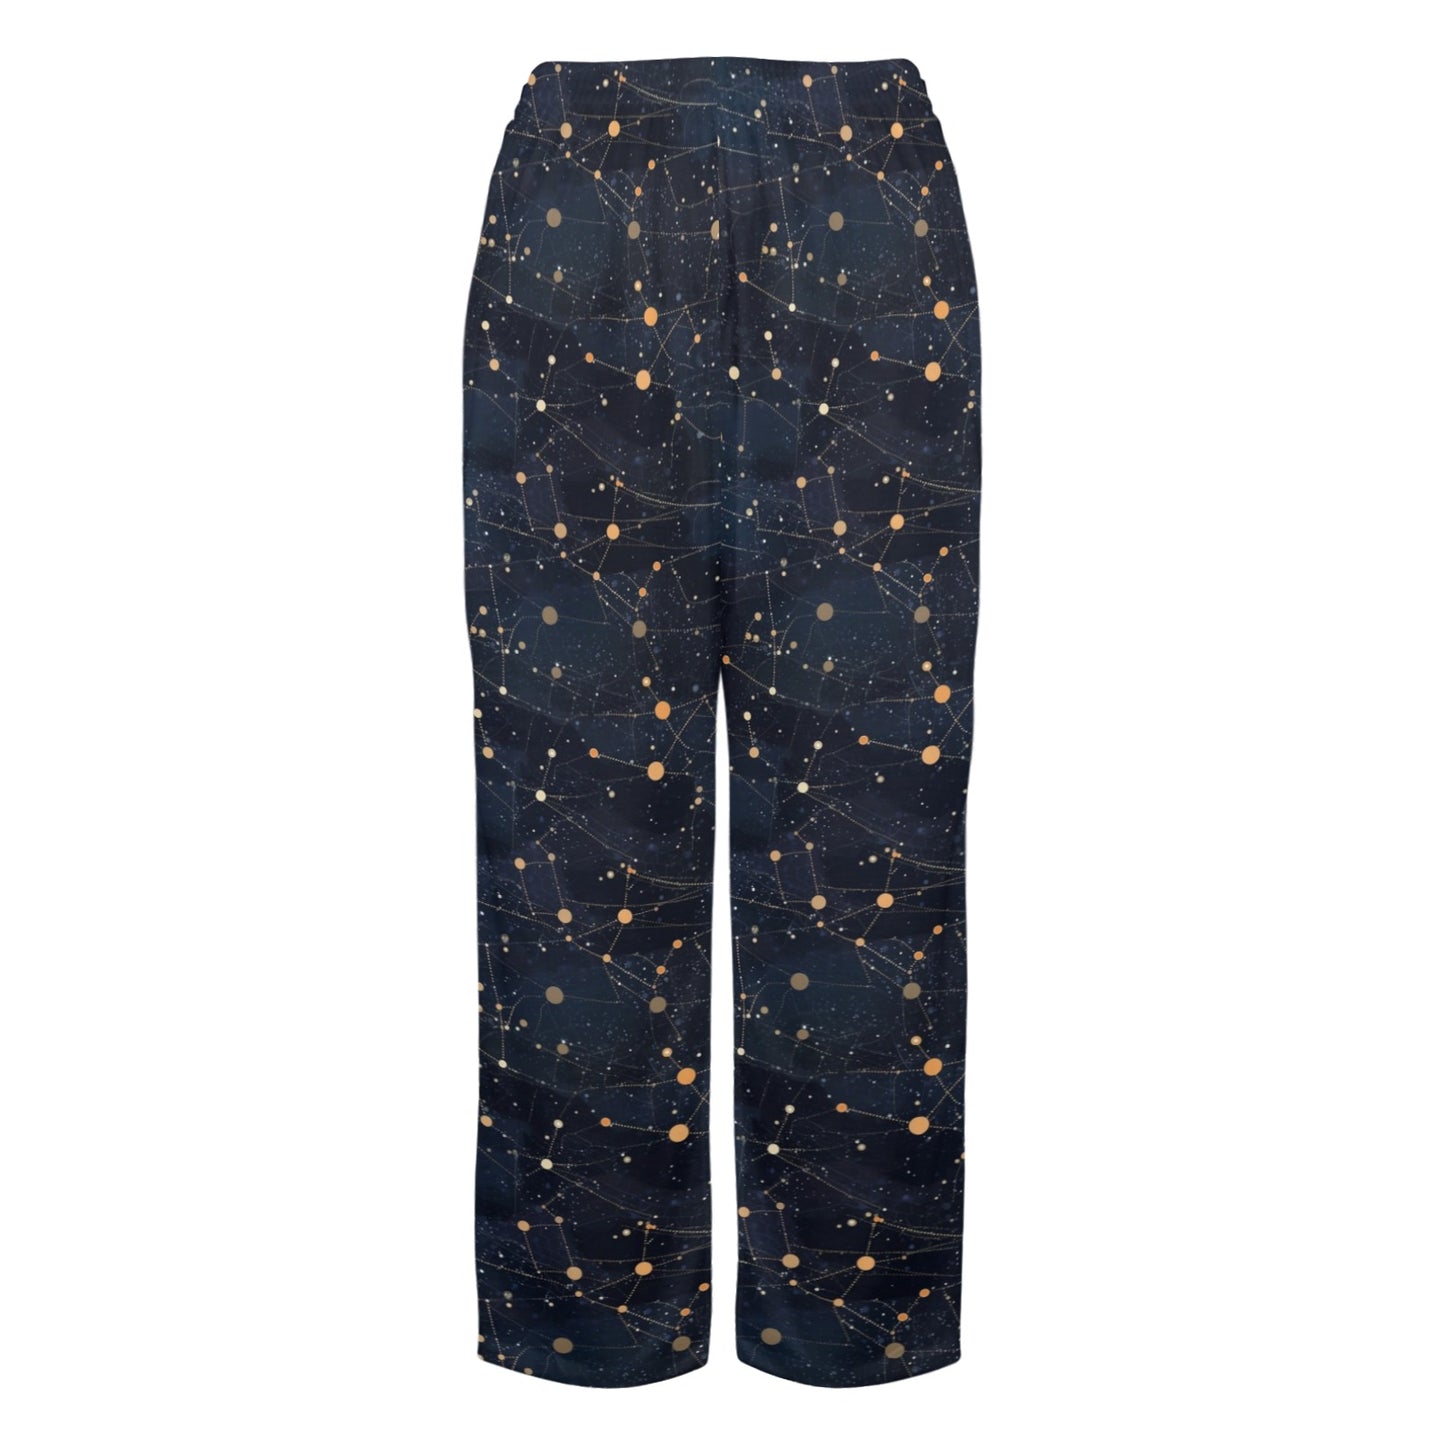 Constellation Women Pajamas Pants, Universe Space Galaxy Satin PJ Funny Pockets Trousers Couples Matching Ladies Trousers Bottoms